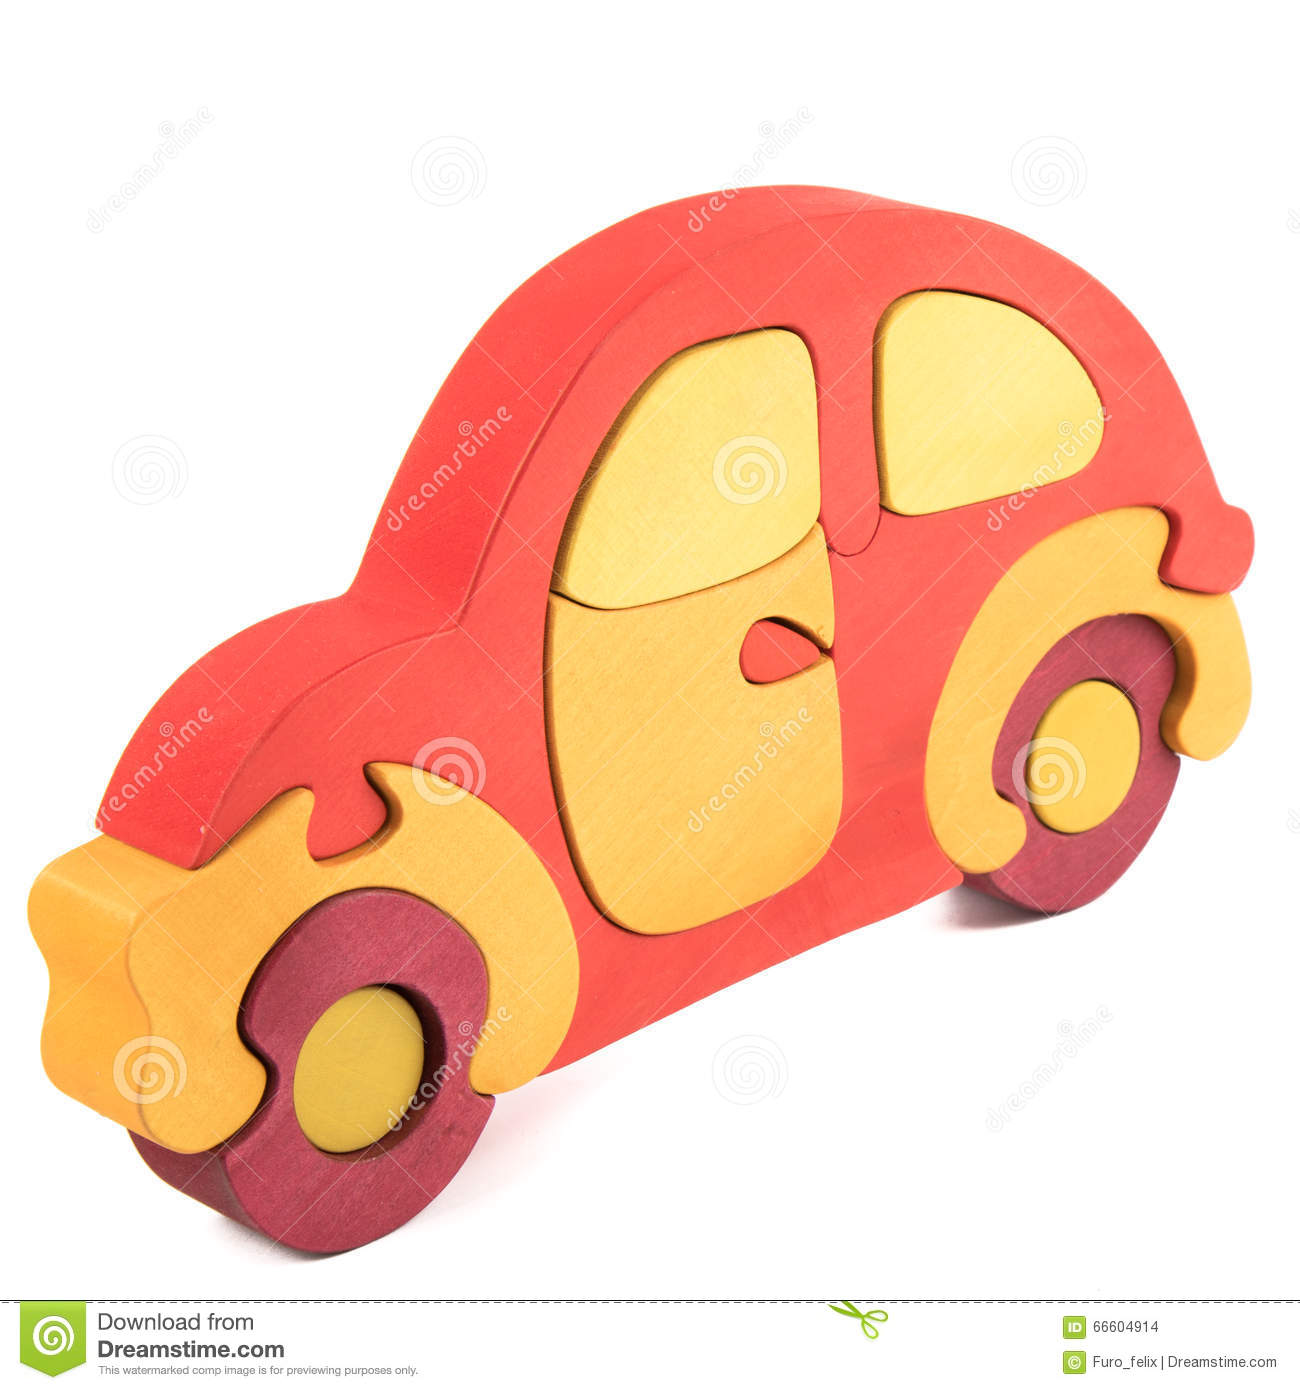 Wooden Car Puzzle Toy Stock Photo.